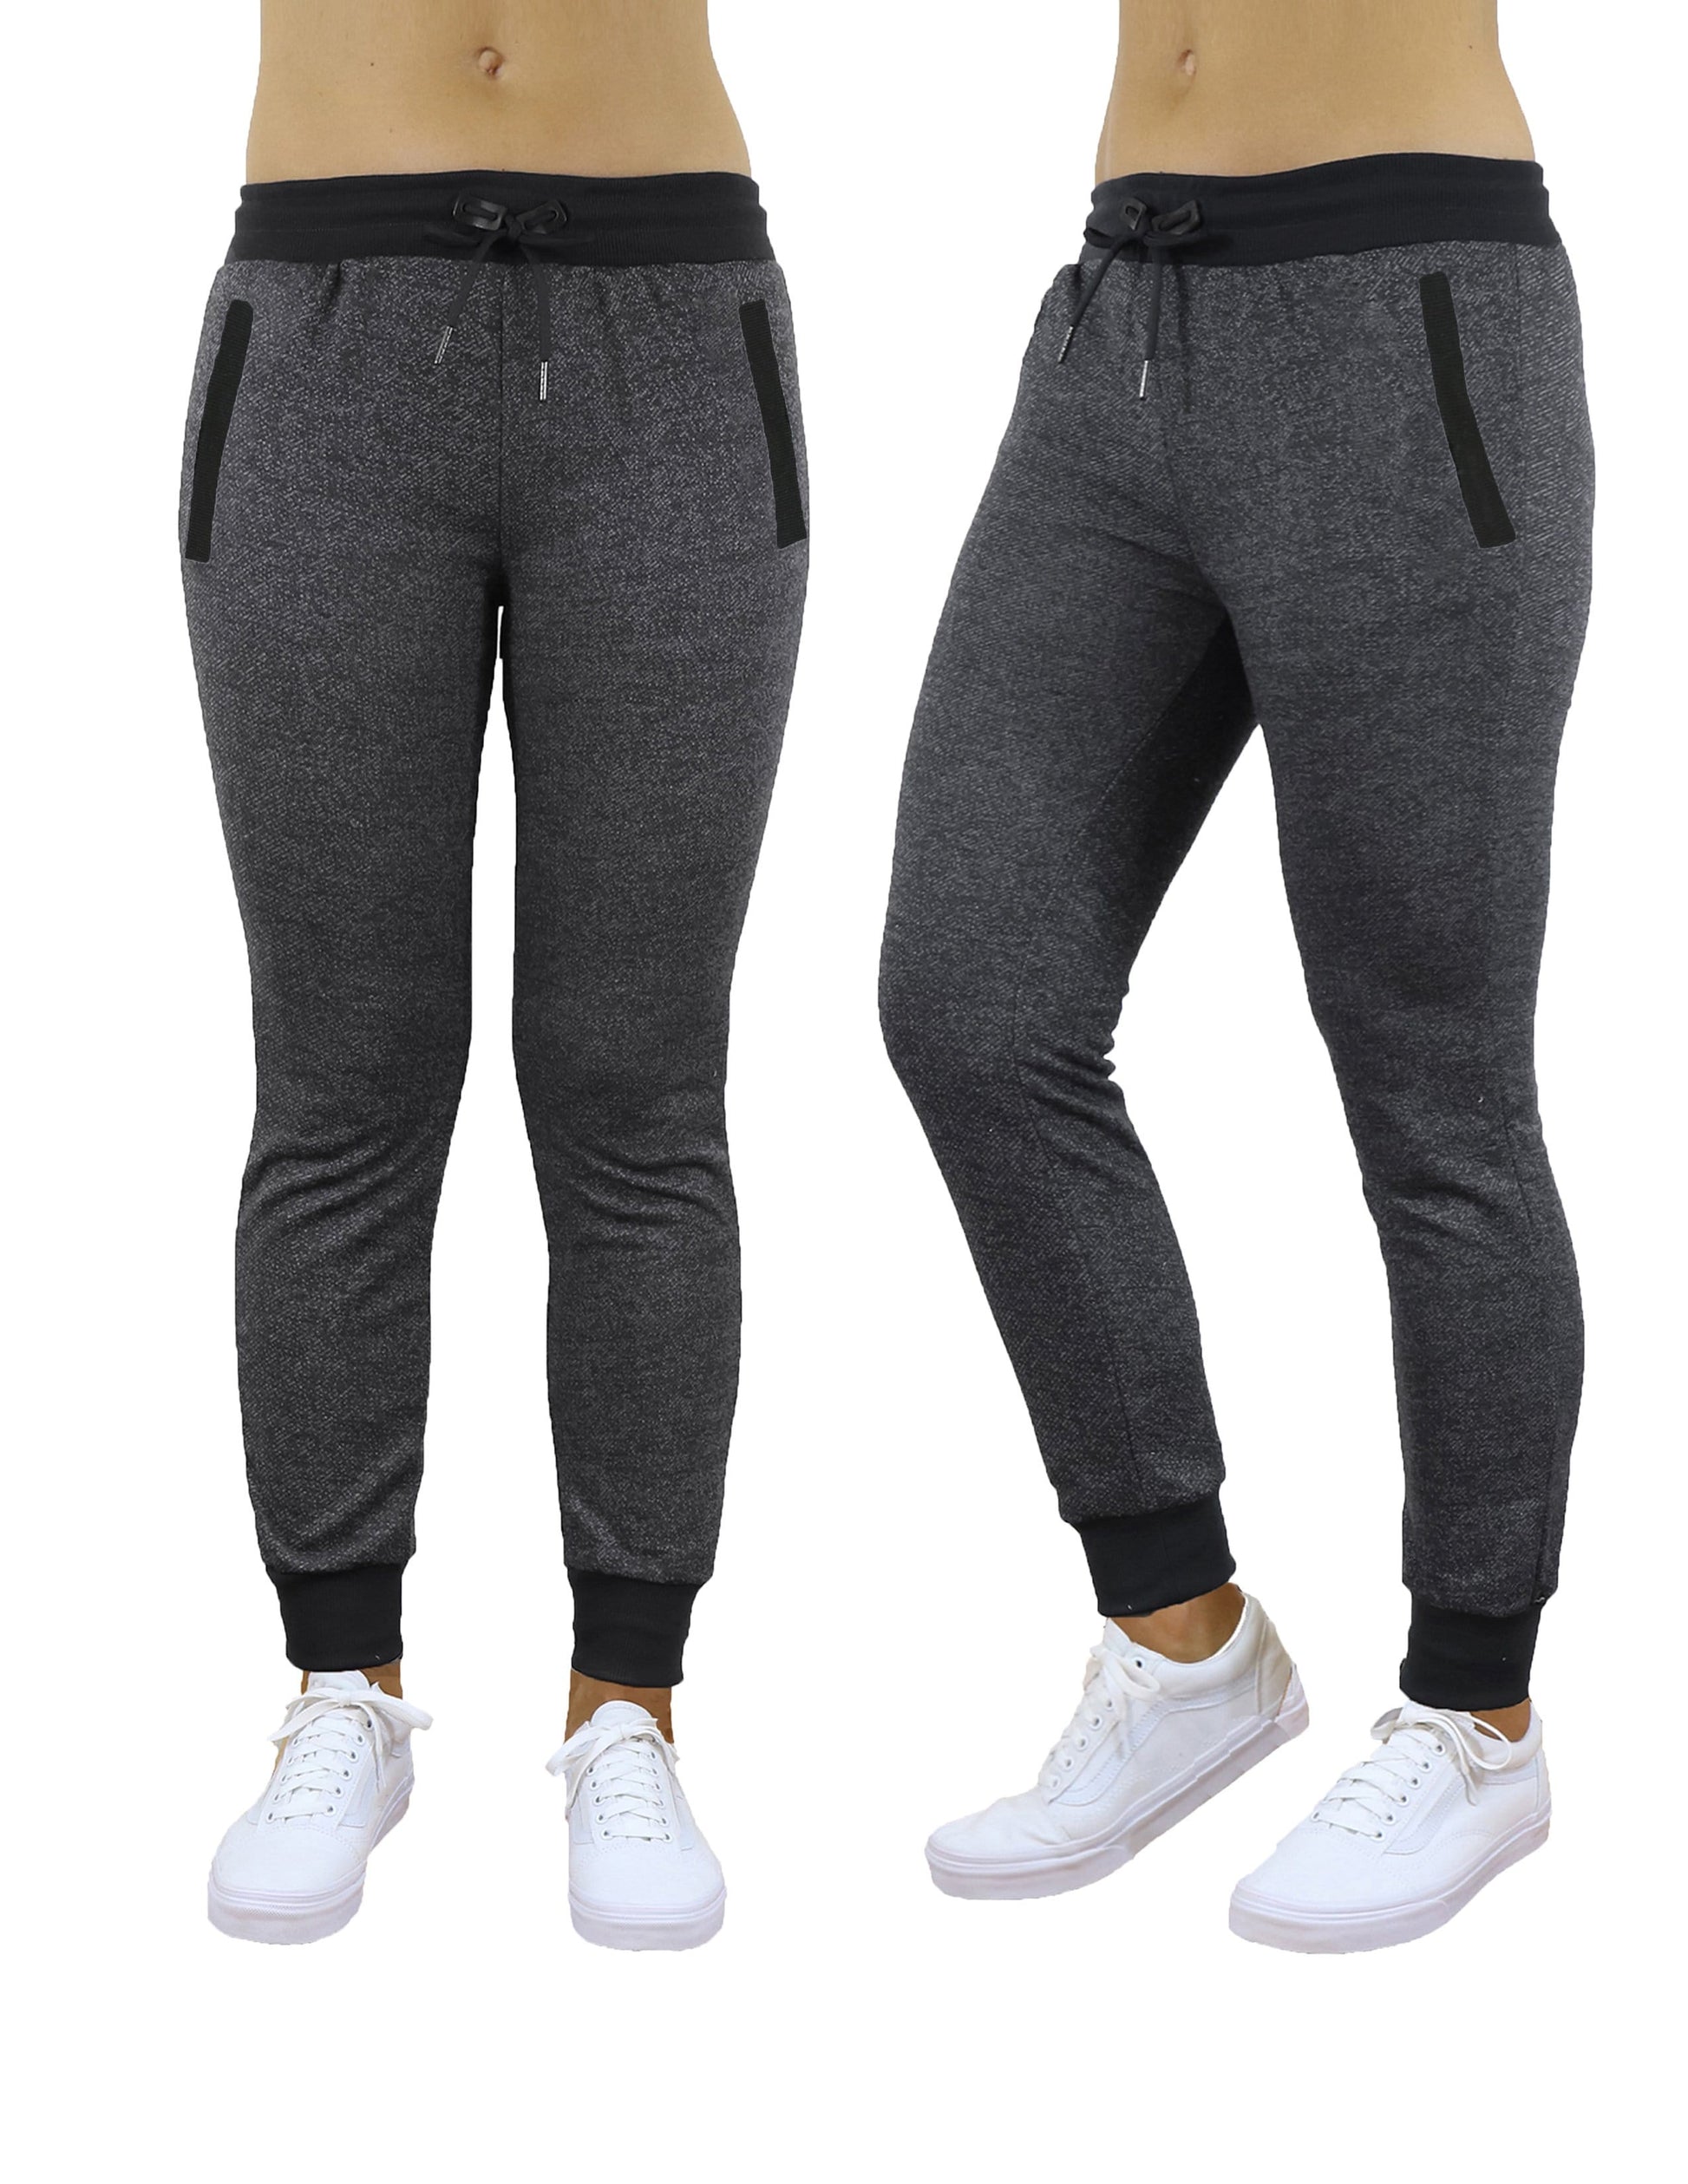  Galaxy by Harvic Women's French Terry Jogger Sweatpants Heather  Grey : Clothing, Shoes & Jewelry